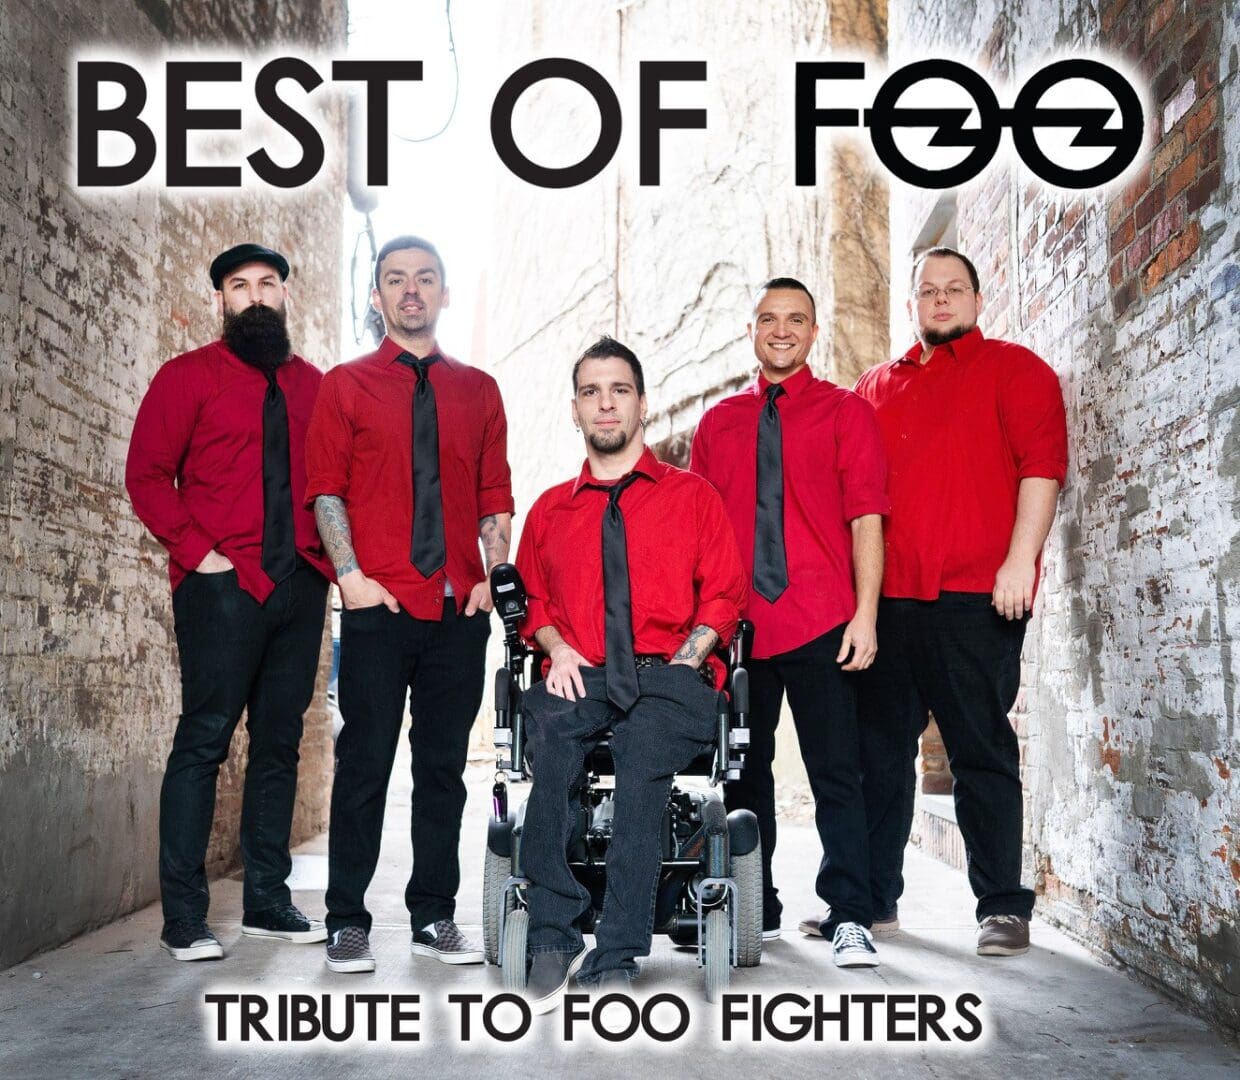 Best Of Foo offer Tribute to the Foo Fighters